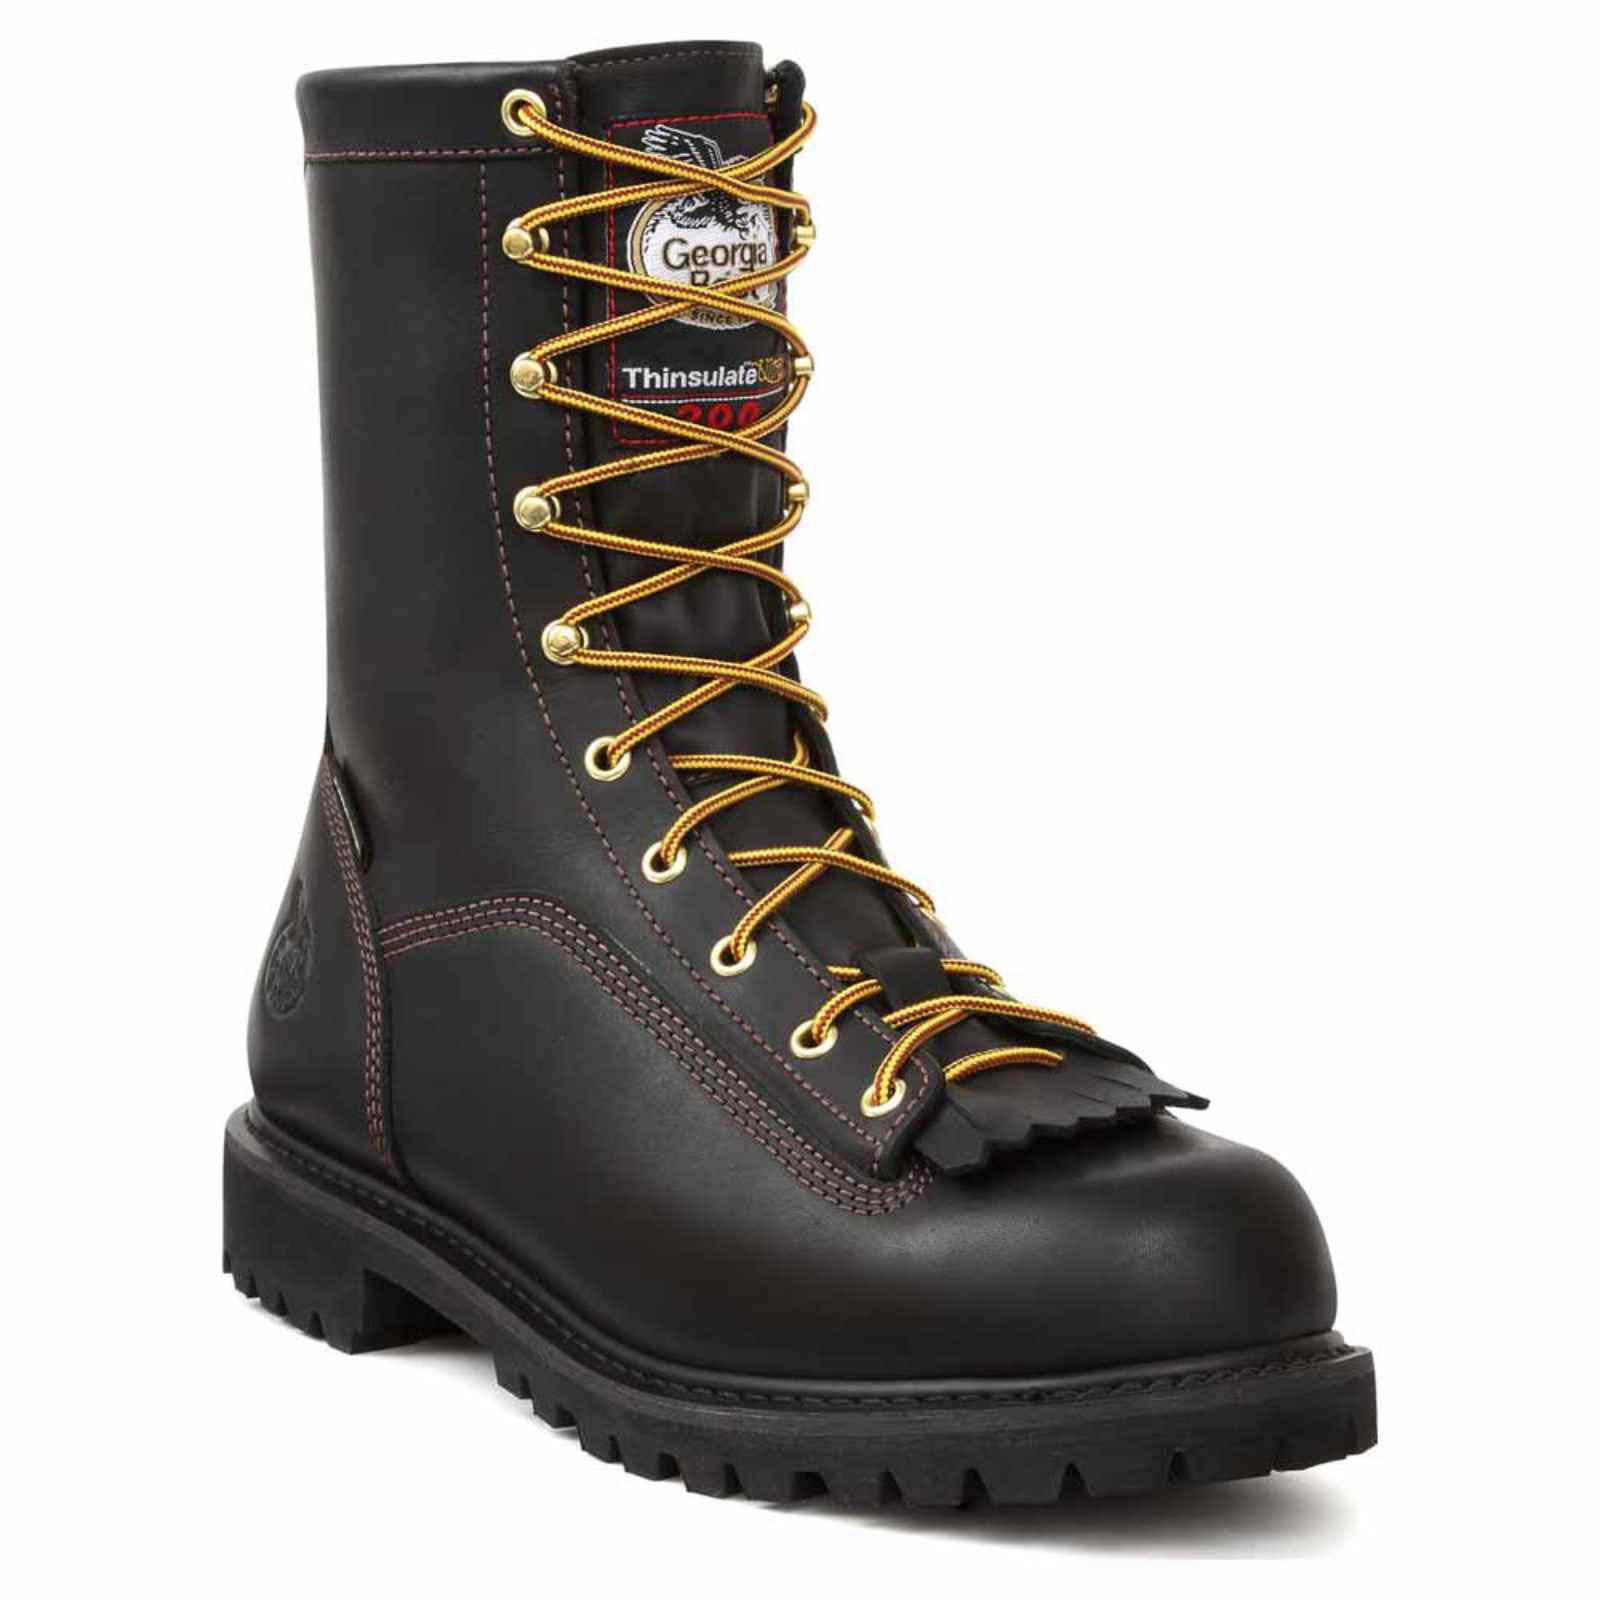 Georgia Lace-To-Toe Gore-Tex Waterproof Insulated Work Boot G8040 ...